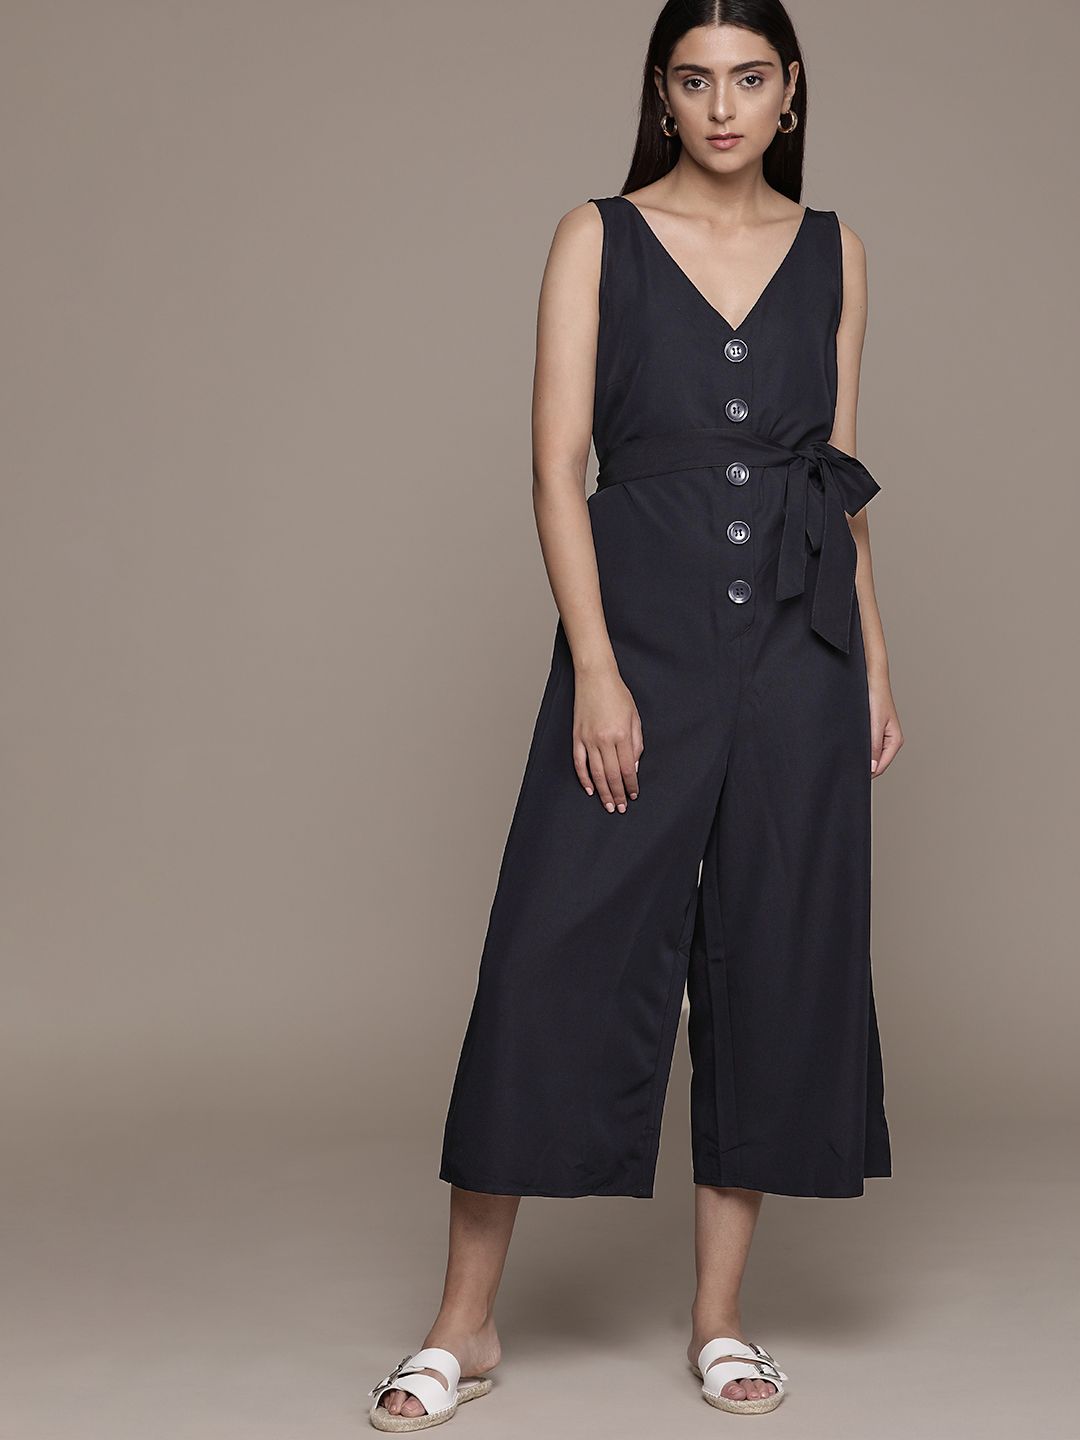 MANGO Women Navy Blue Solid Culotte Jumpsuit Price in India